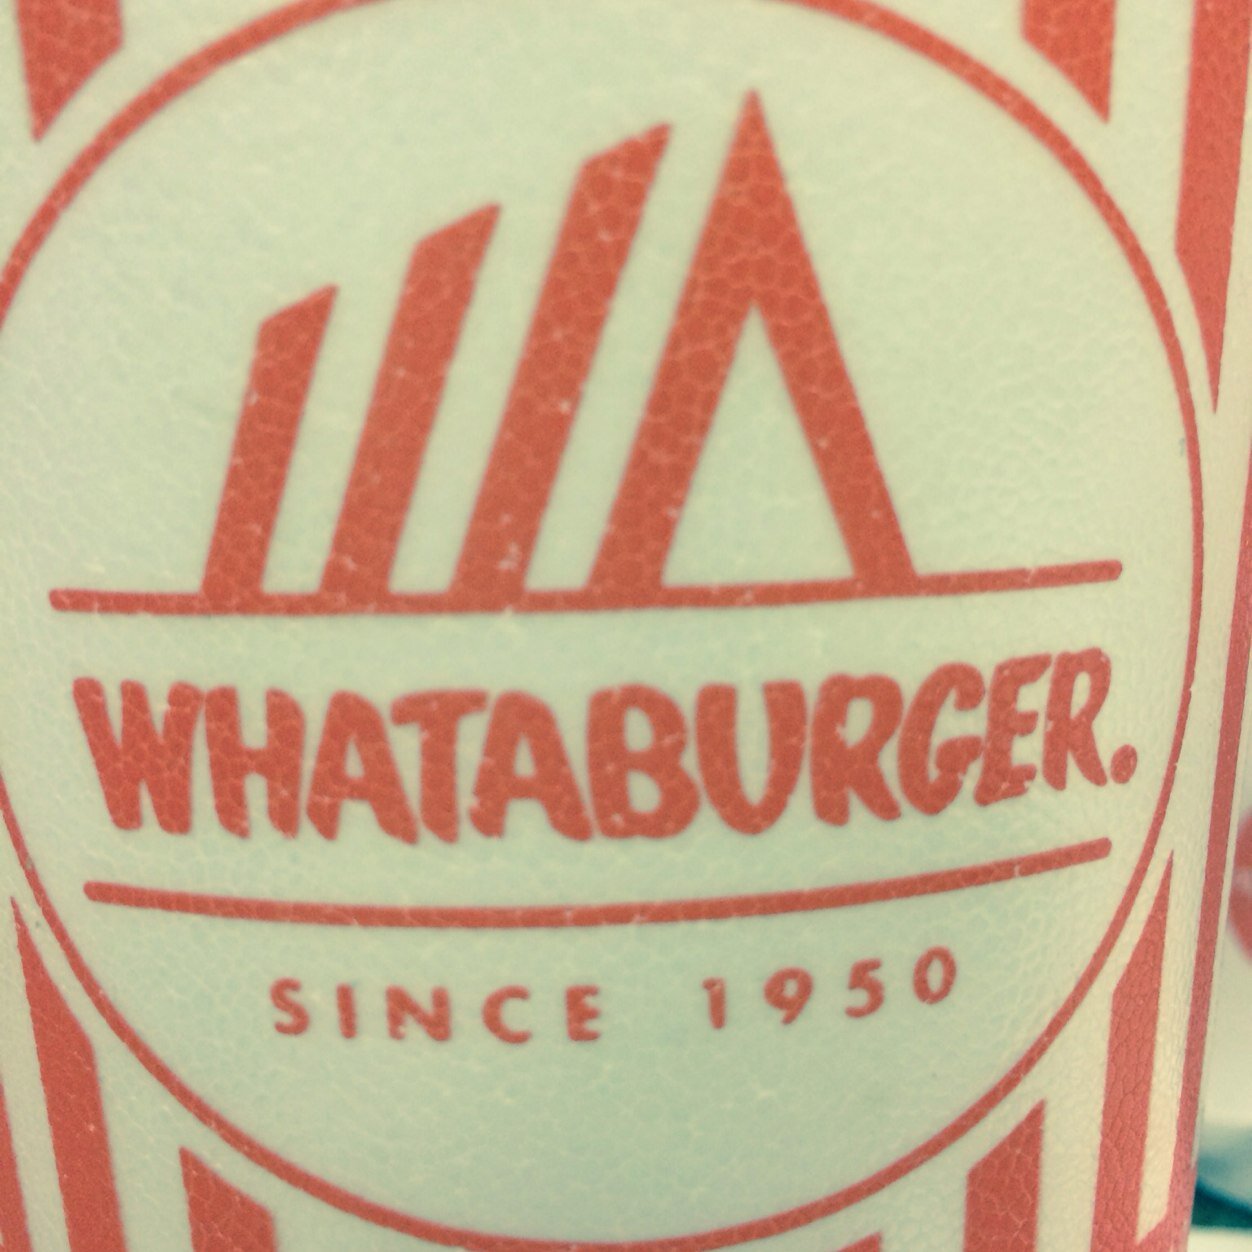 Devoted to those drunken nights we all ended up at Whataburger  **Not affiliated with Whataburger or Texas Tech** TTUWhataburger@gmail.com